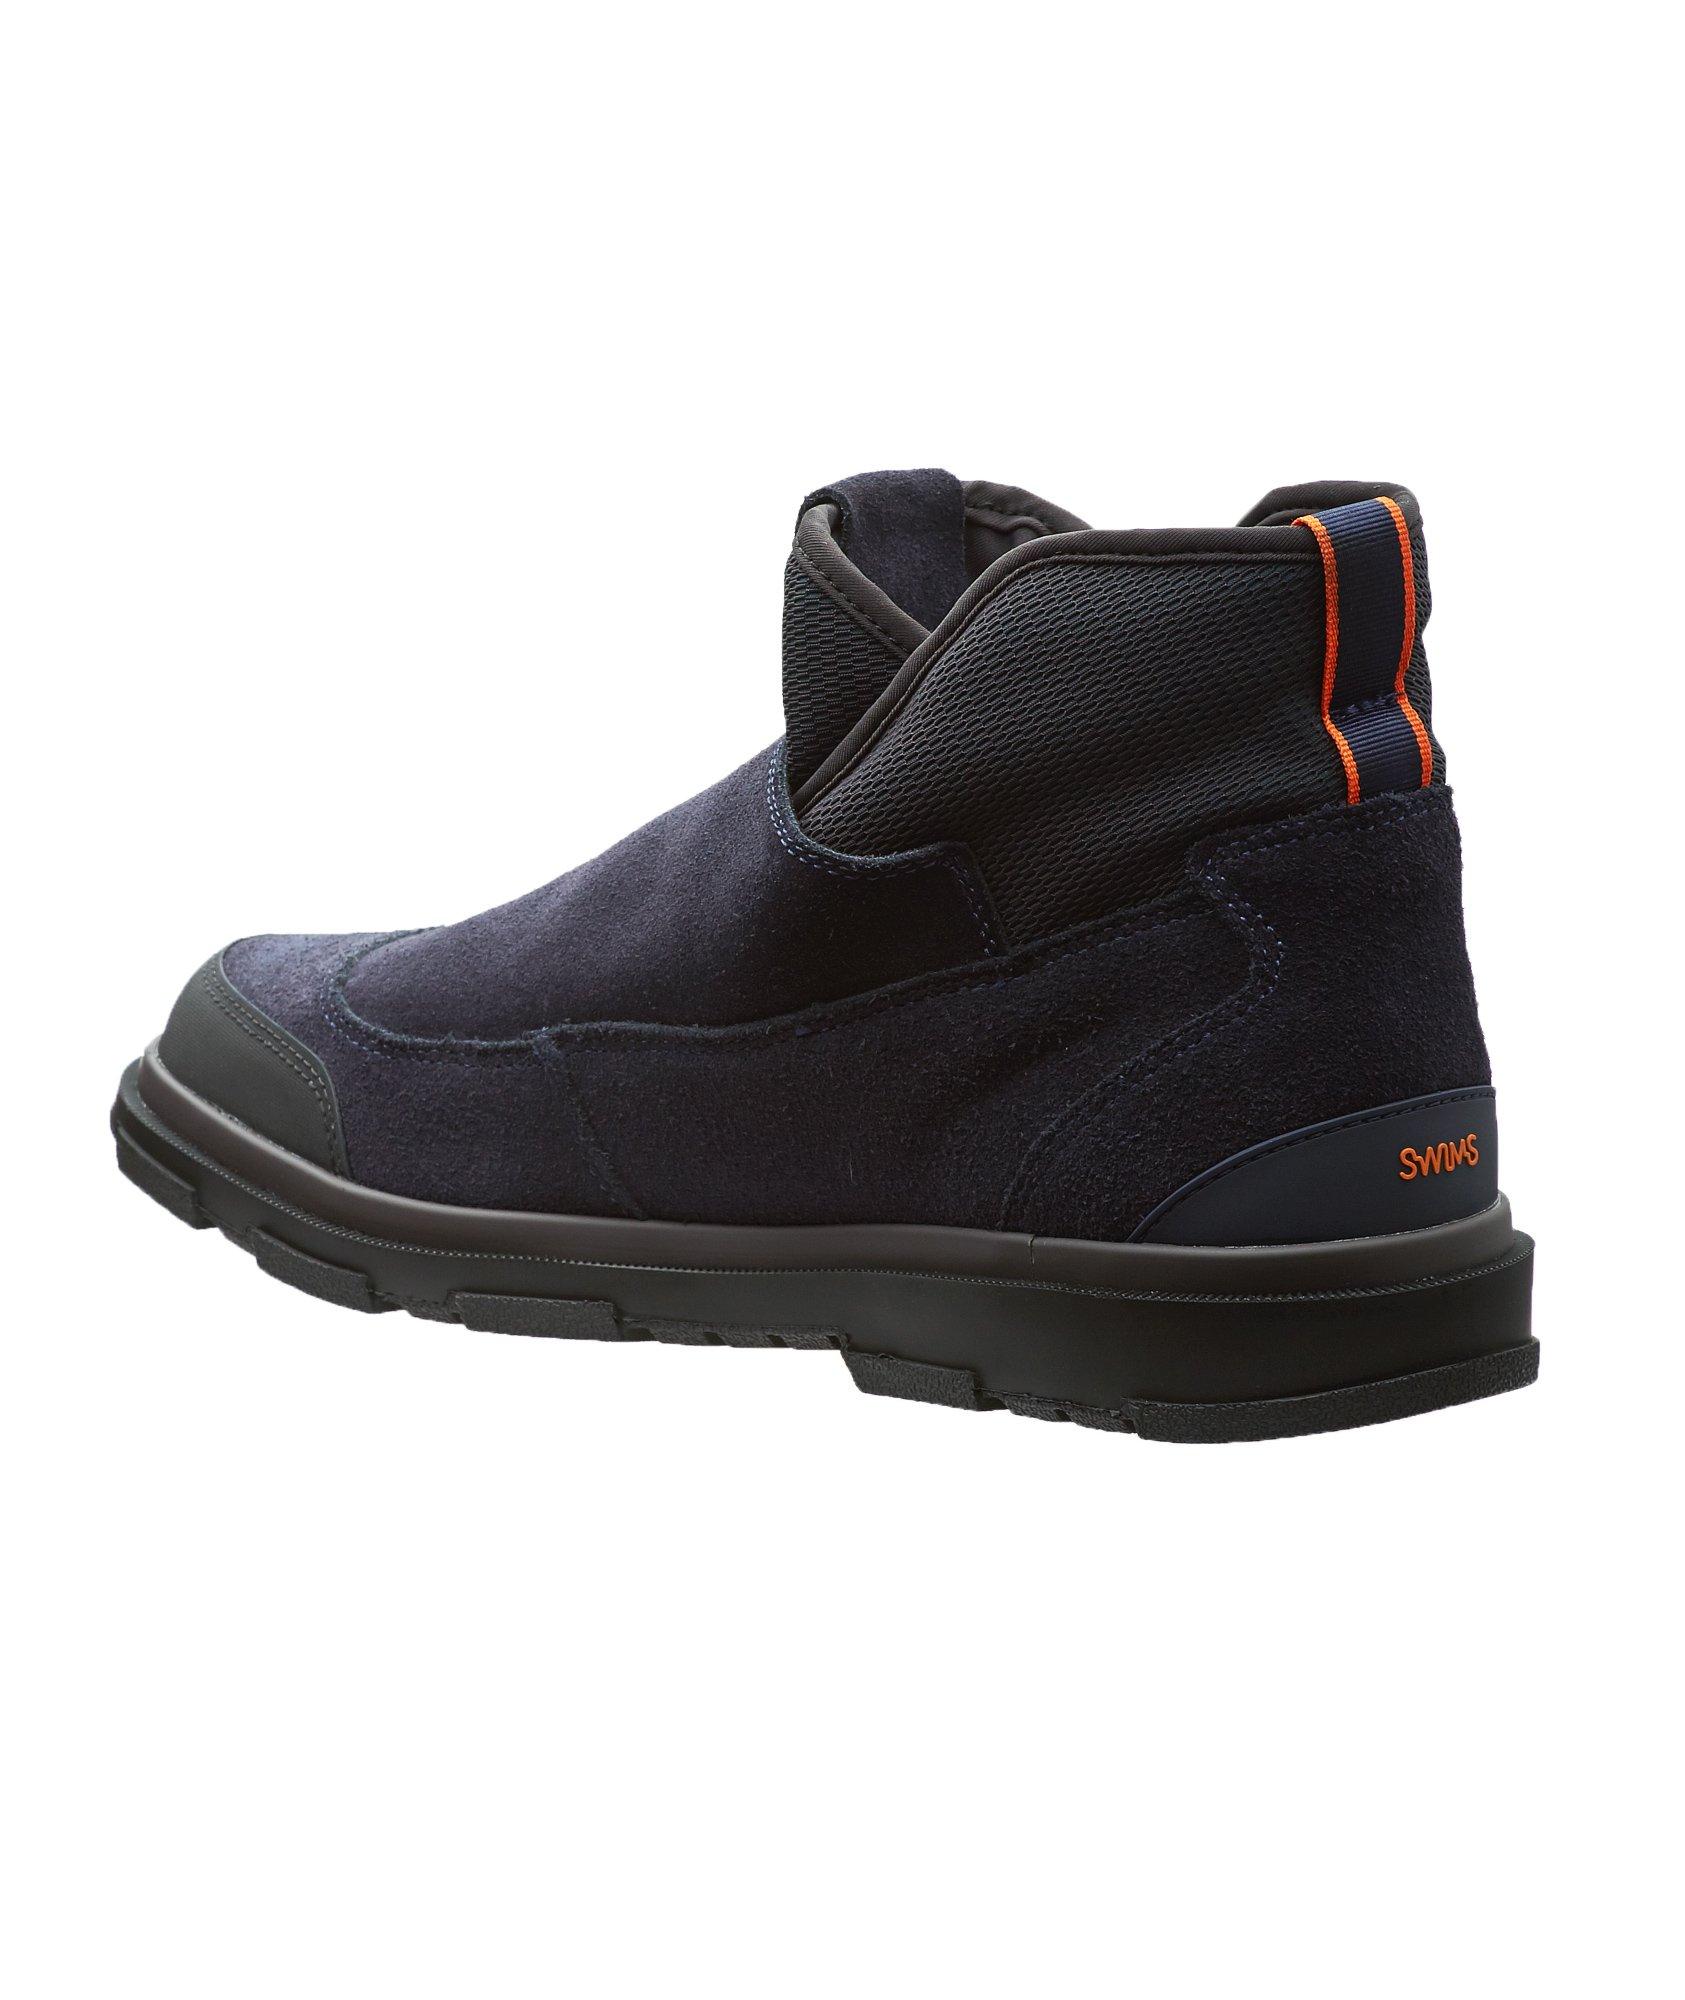 Storm Gaitor Boots image 1